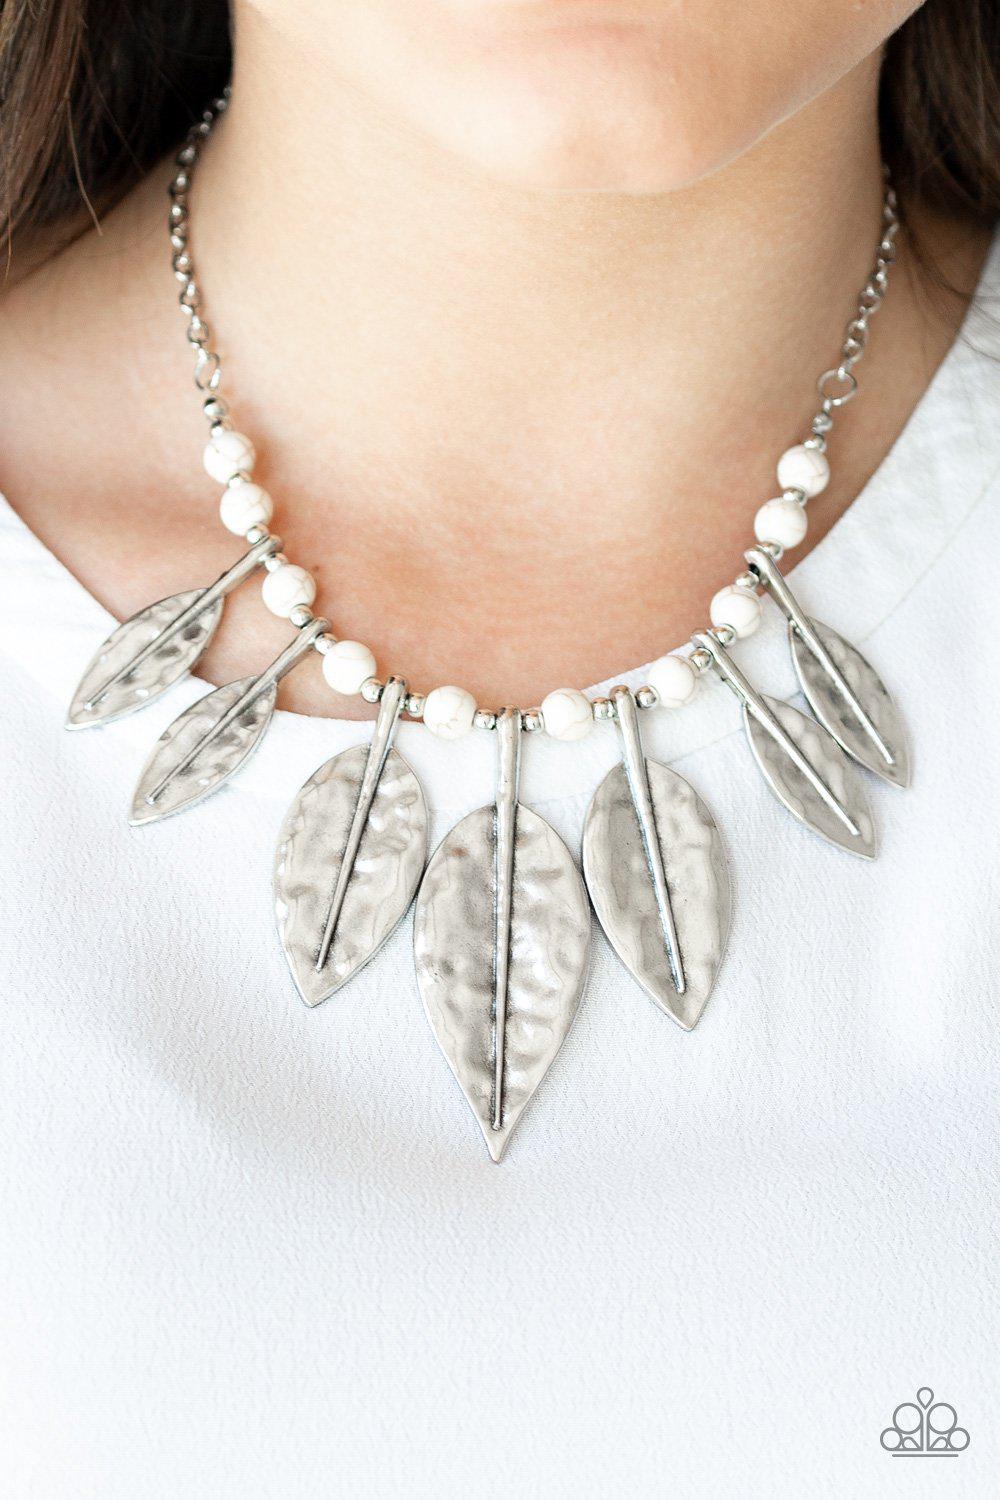 Highland Harvester White Stone and Silver Feather Necklace - Paparazzi Accessories - model -CarasShop.com - $5 Jewelry by Cara Jewels